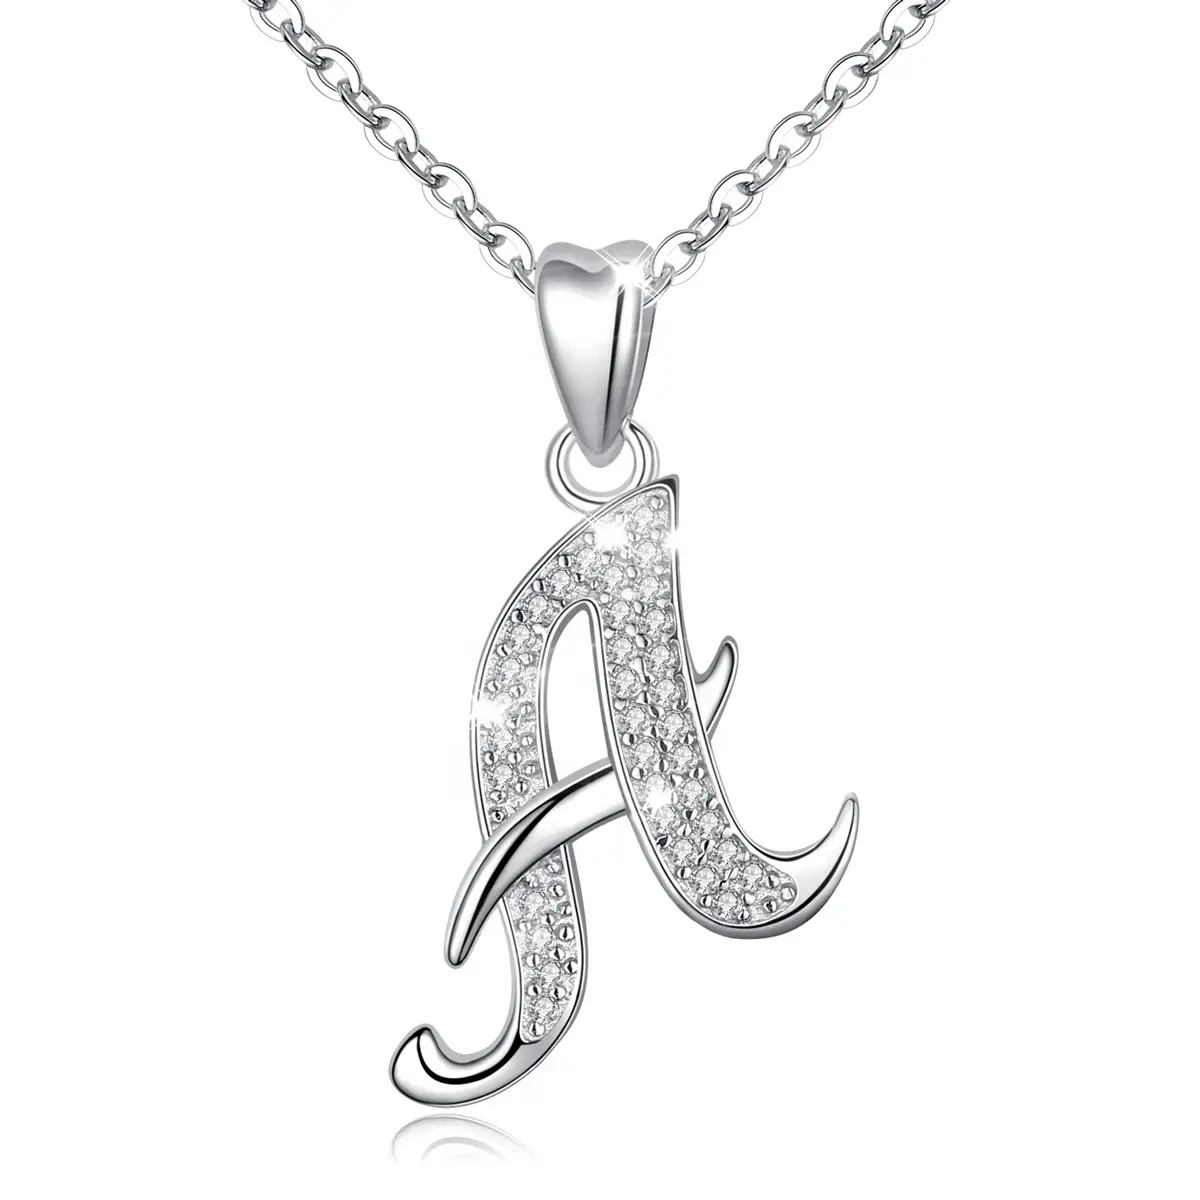 High Quality 925 Sterling Silver CZ Stone Cubic Zirconia Jewelry 26 English Alphabet Letter Initial Pendant Necklace for Women